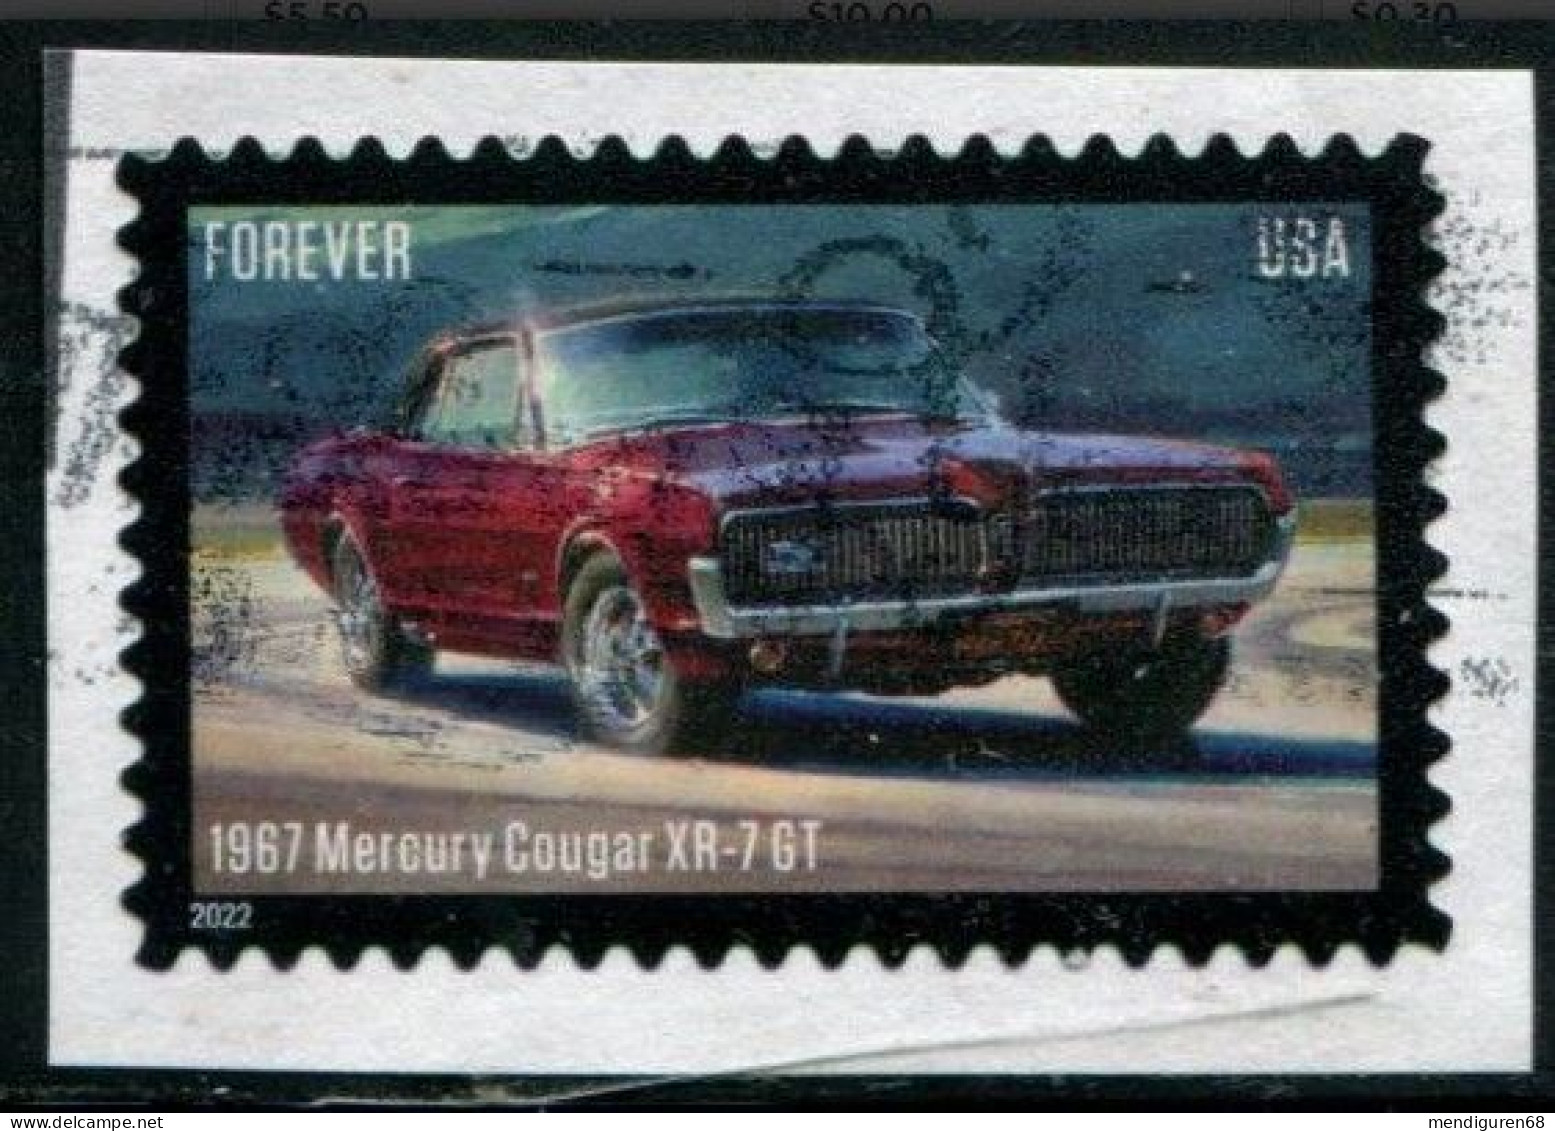 VEREINIGTE STAATEN ETATS UNIS USA 2022 PONY CARS: 1967 MERCURY COUGAR XR-7 GT USED ON PAPER SN 5718 - Used Stamps